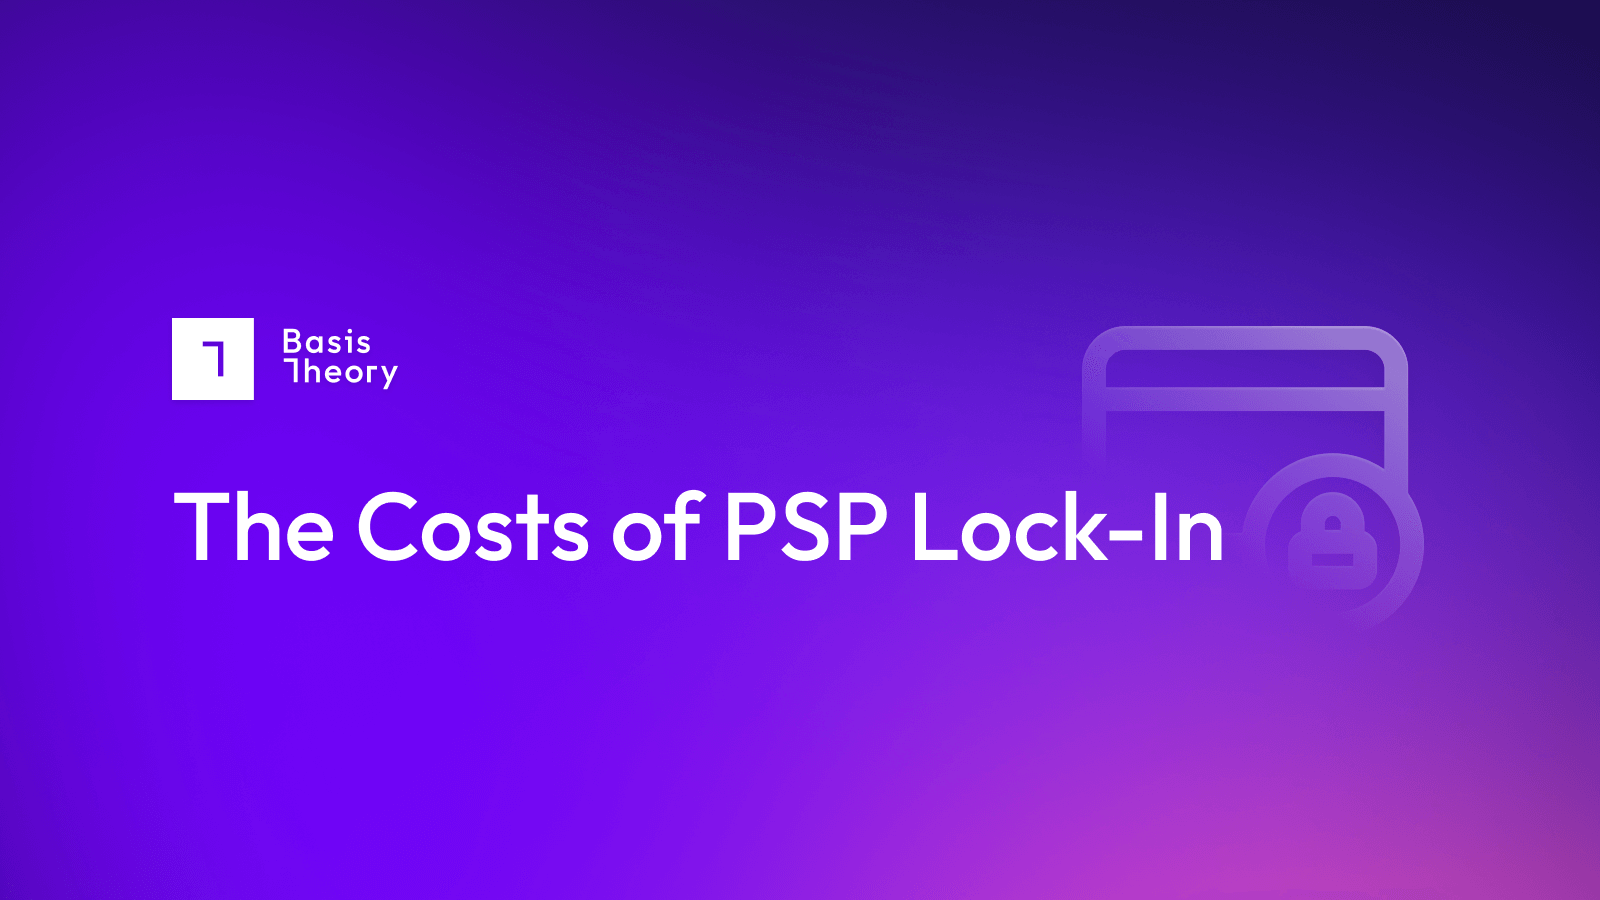 the real costs of PSP lock-in